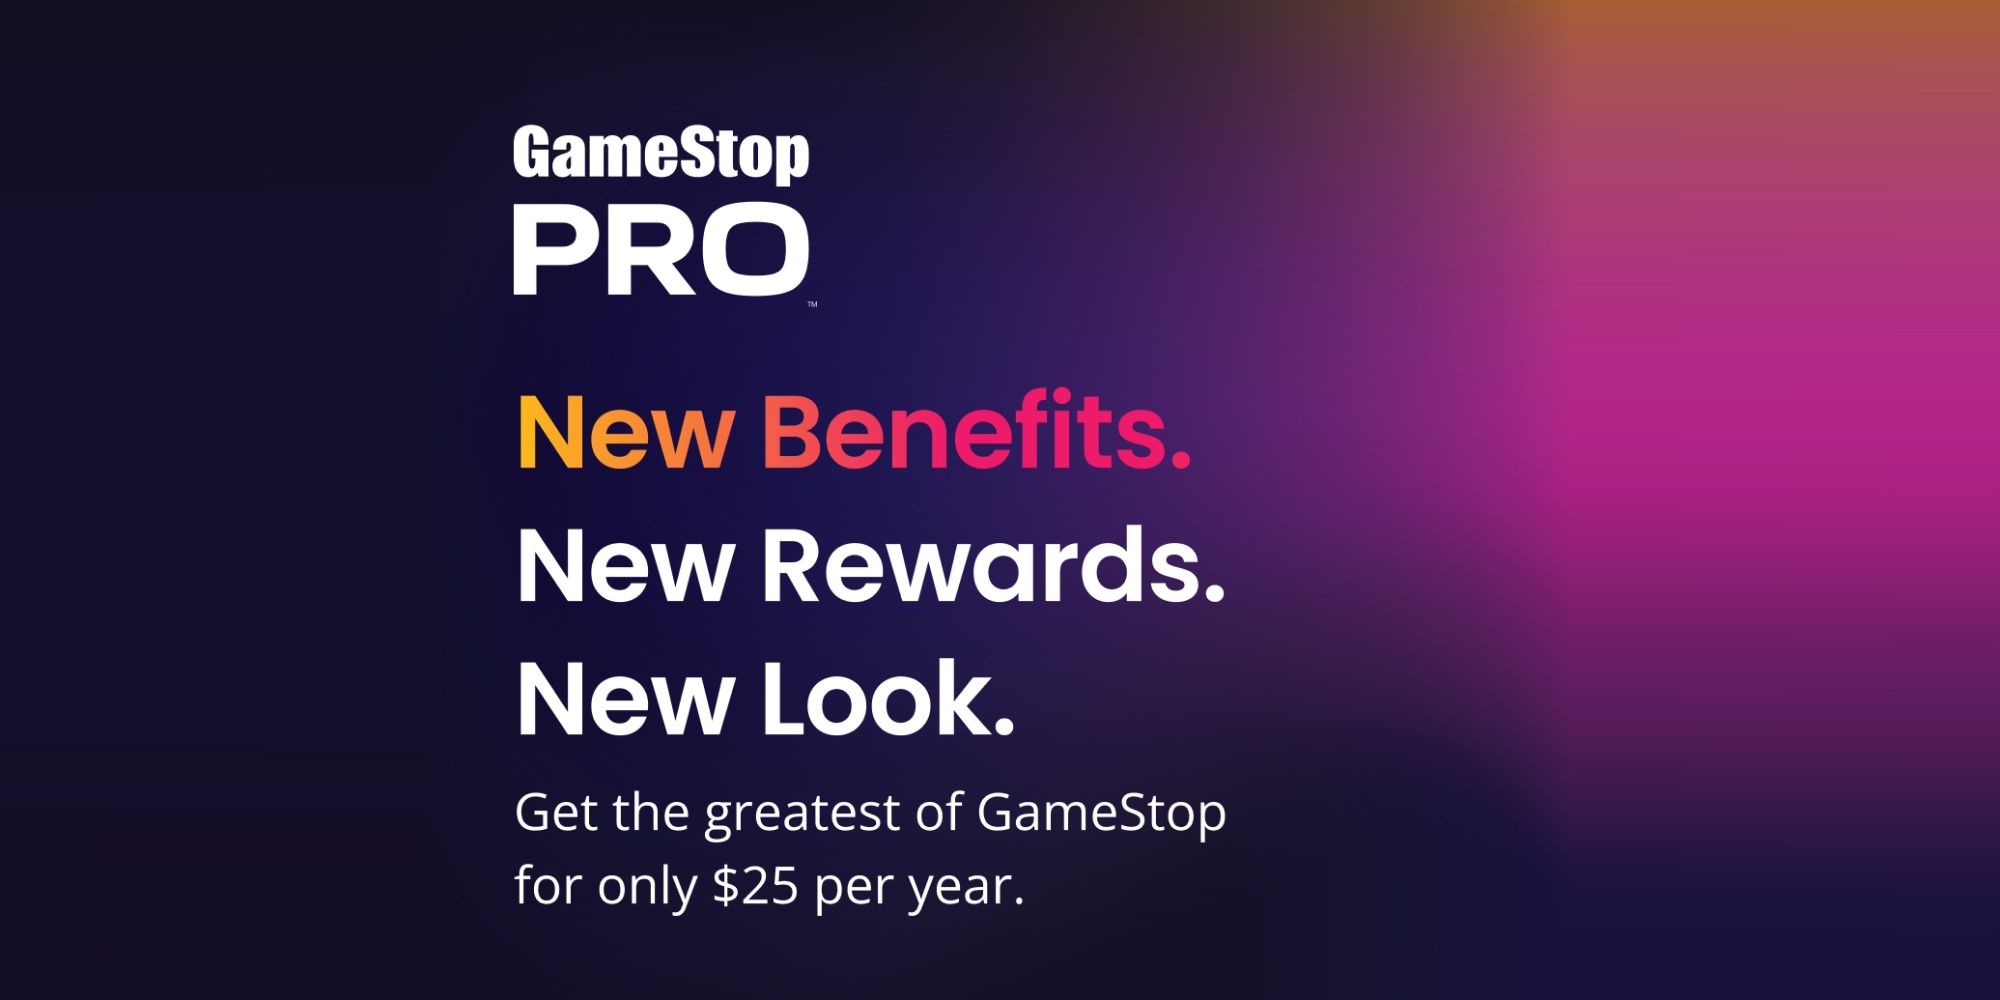 GameStop Pro Has Been Revamped, Offering More Value Than Ever